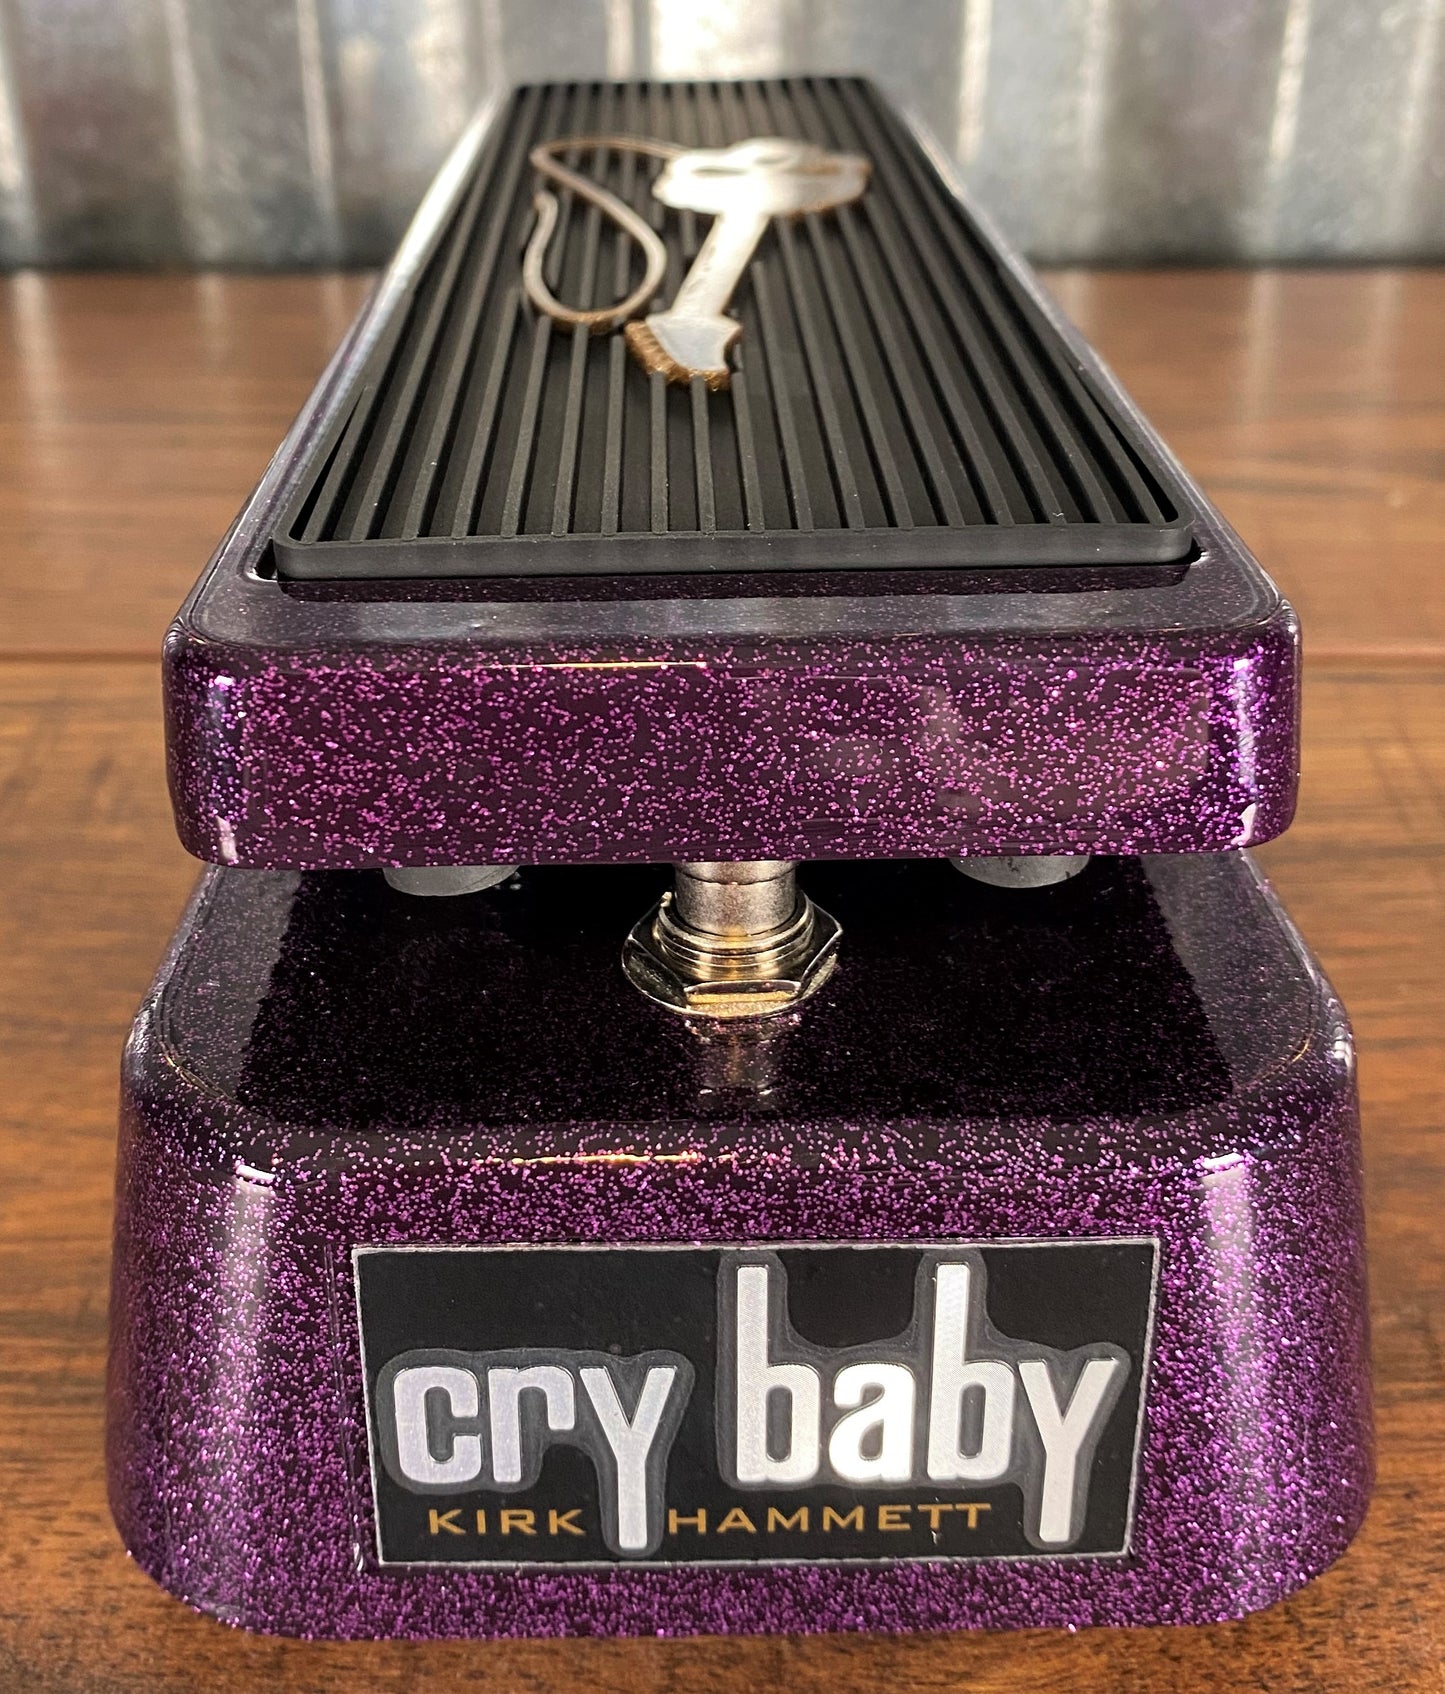 Dunlop Kirk Hammett Collection Cry Baby Wah Guitar Pedal